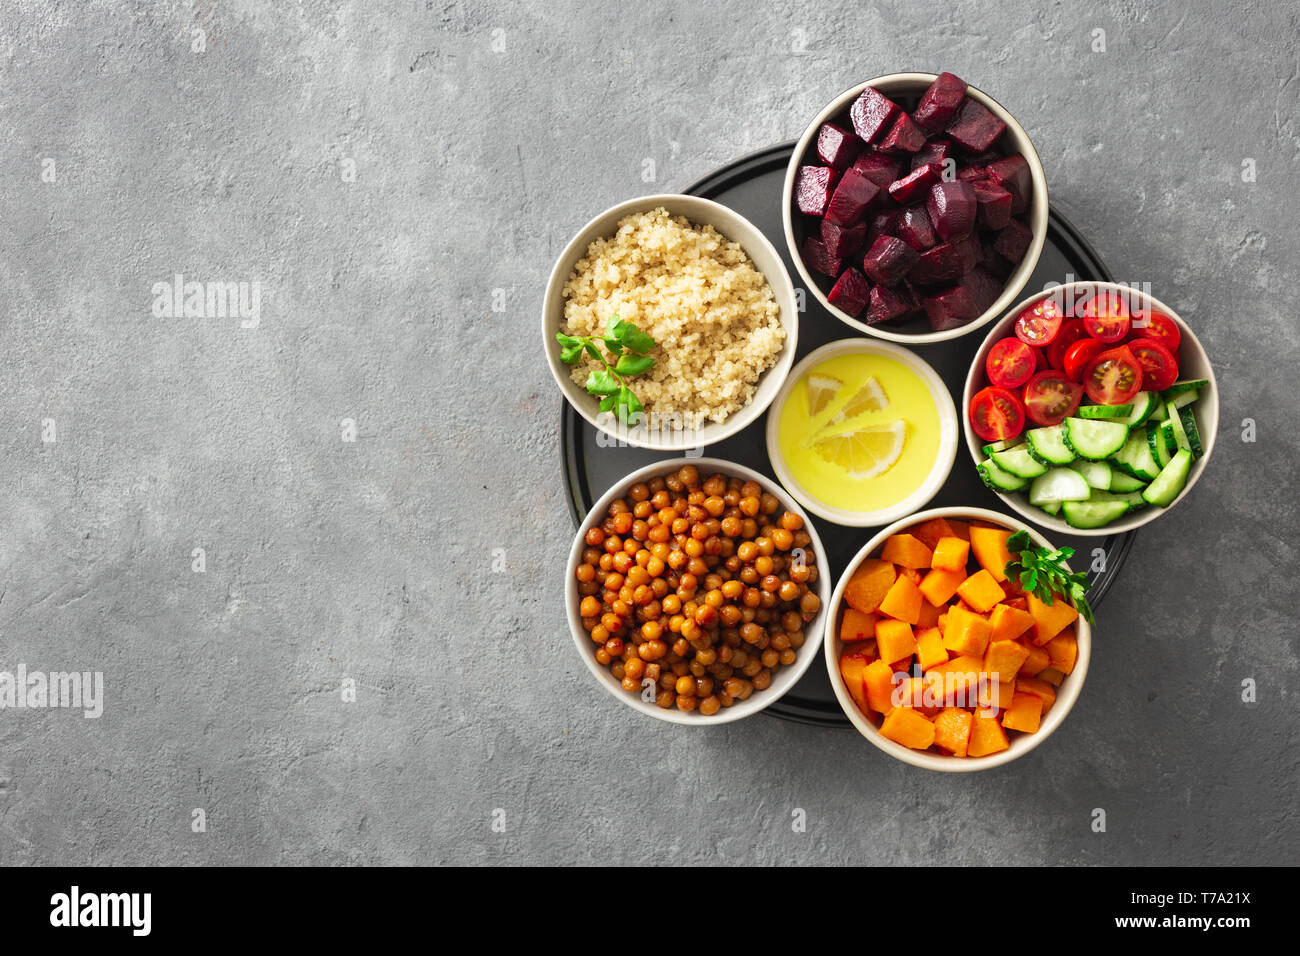 Healthy vegetarian ingredients for cooking moroccan salad. Chickpeas, Baked pumpkin and beets, quinoa and vegetables top view Stock Photo